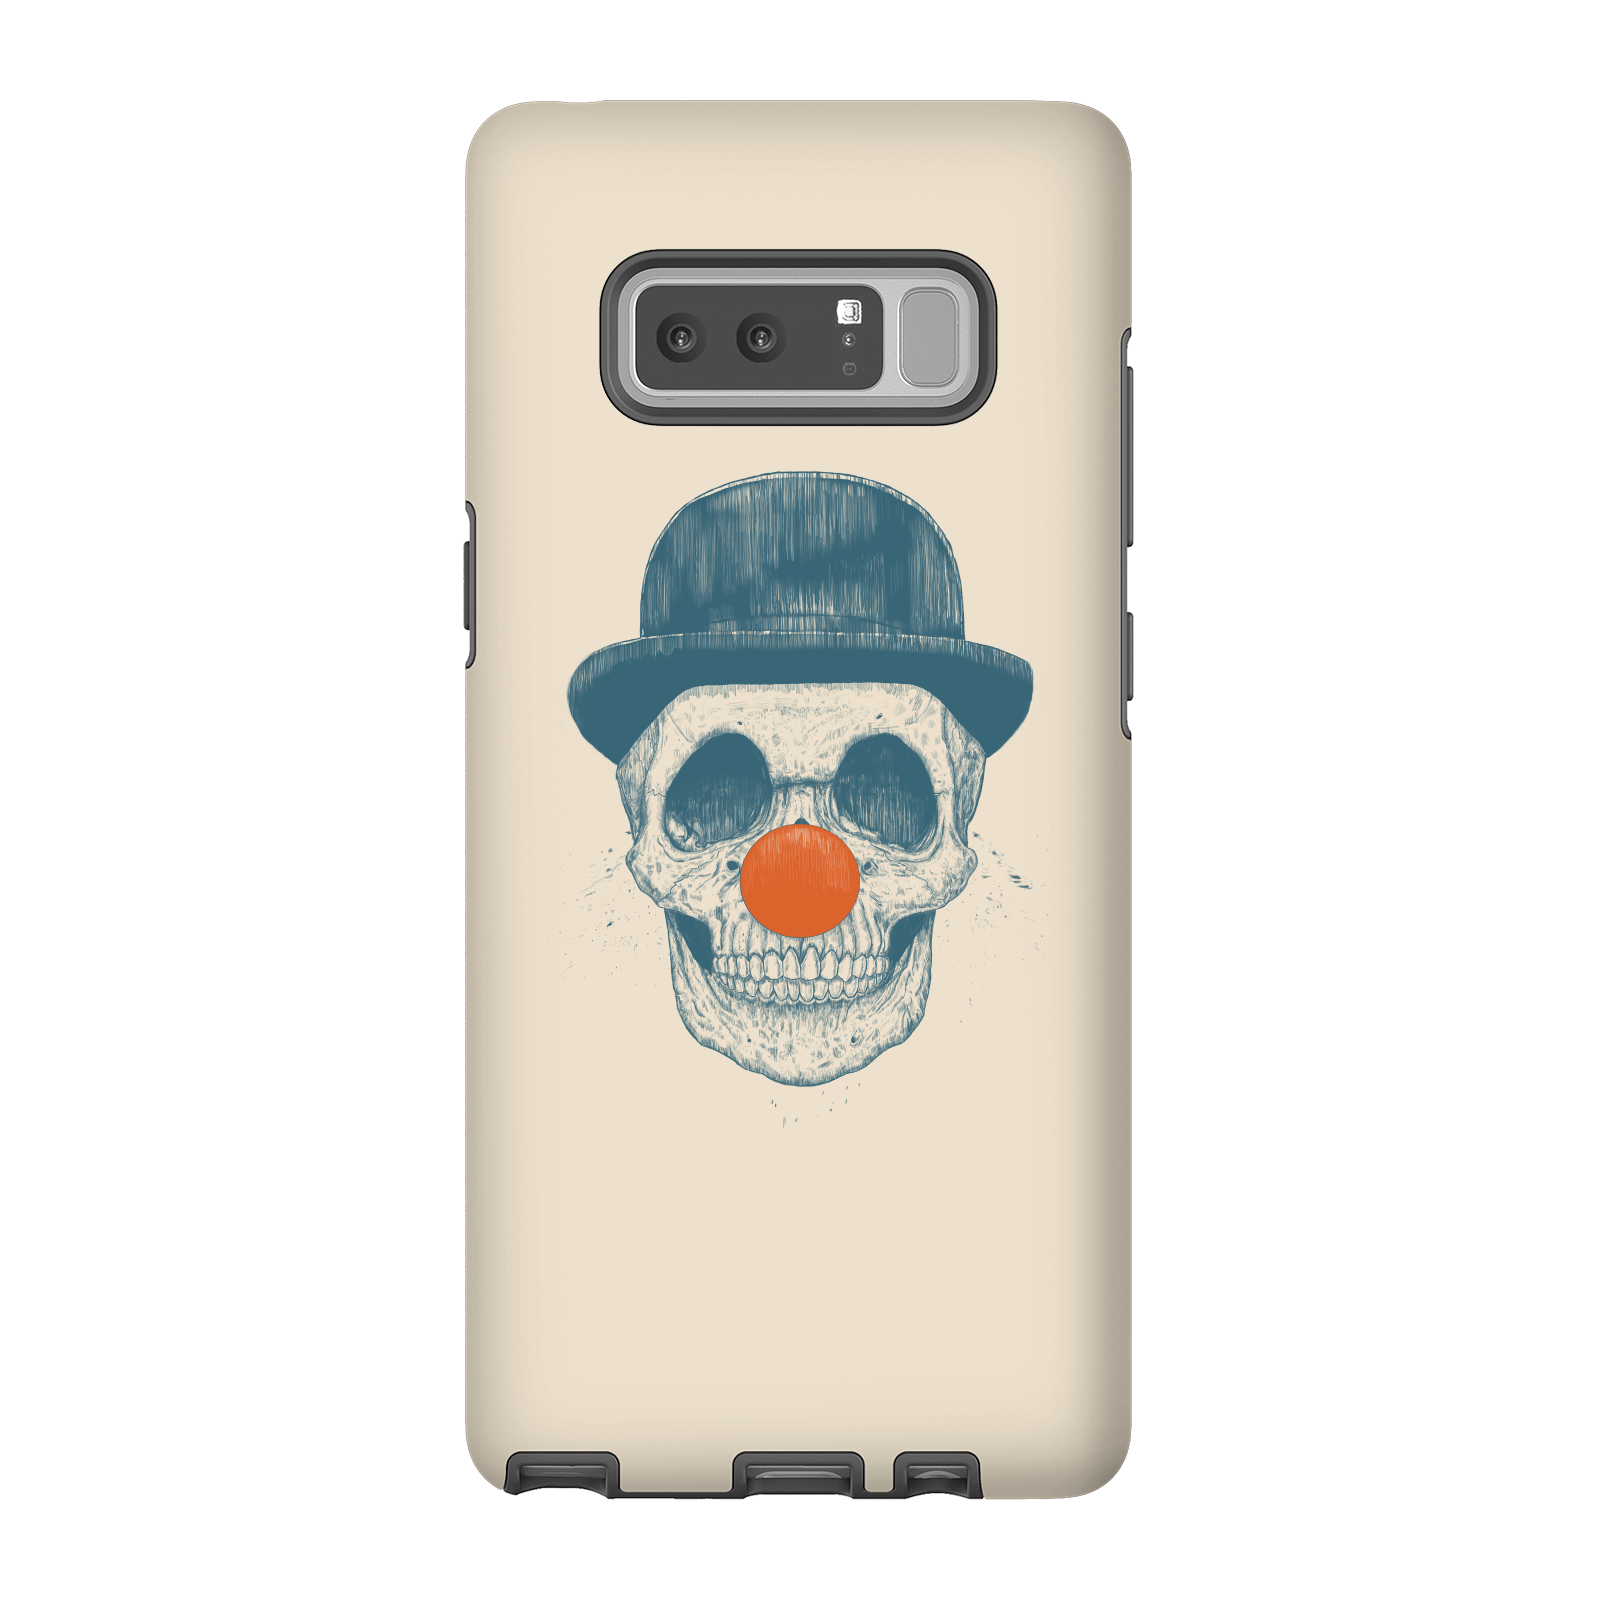 balazs solti red nosed skull phone case for iphone and android - samsung note 8 - tough case - matte